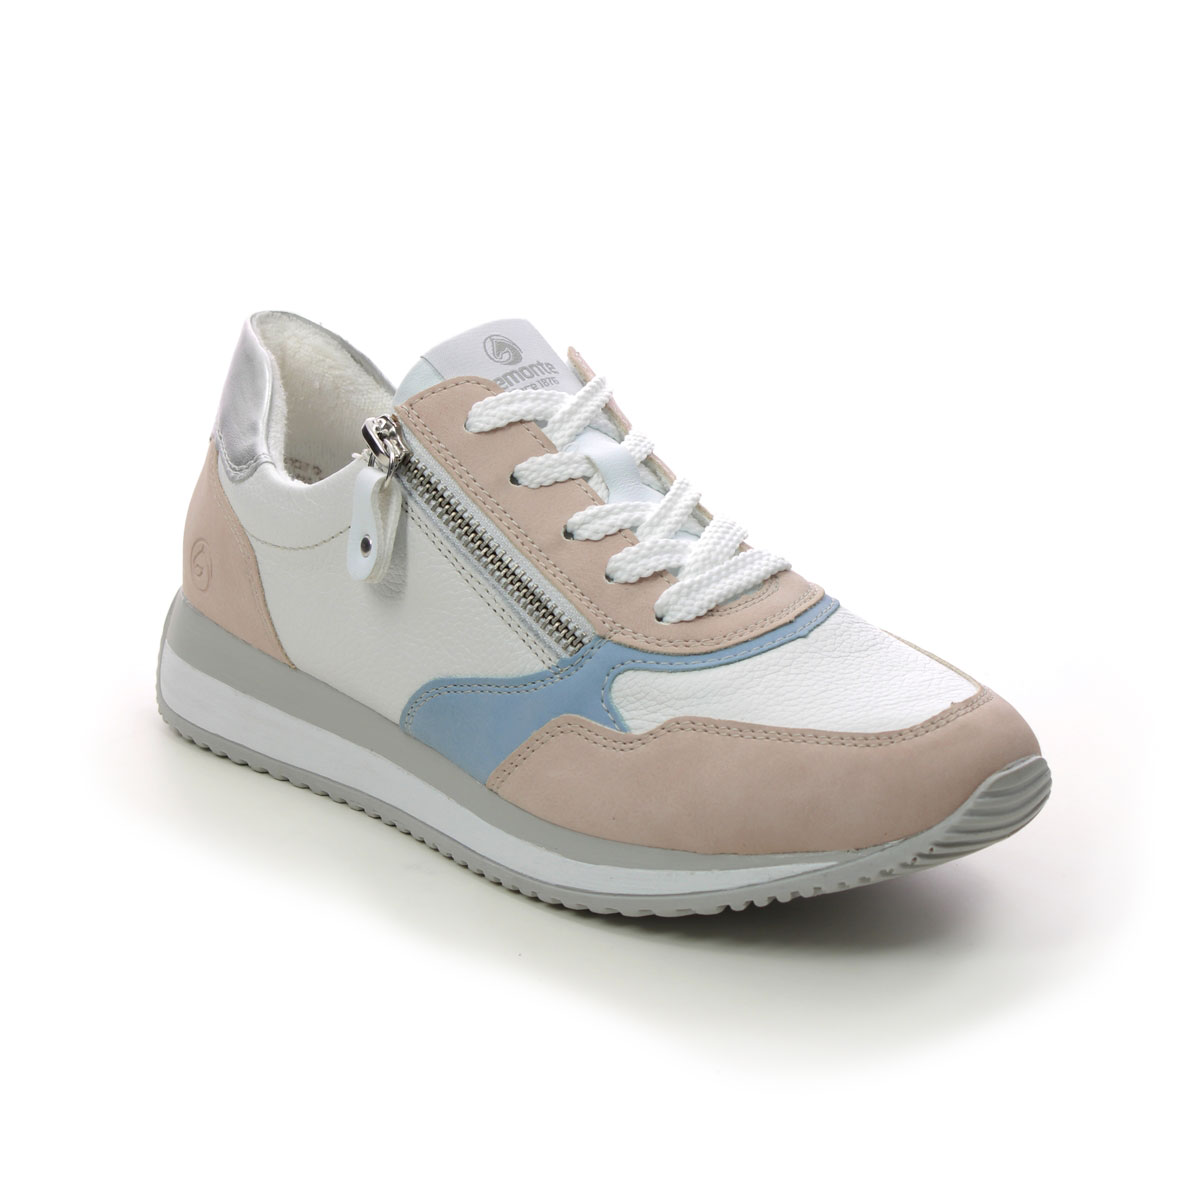 Remonte Vapod Zip White Blue Pink Womens Trainers D0H01-80 In Size 40 In Plain White Blue Pink